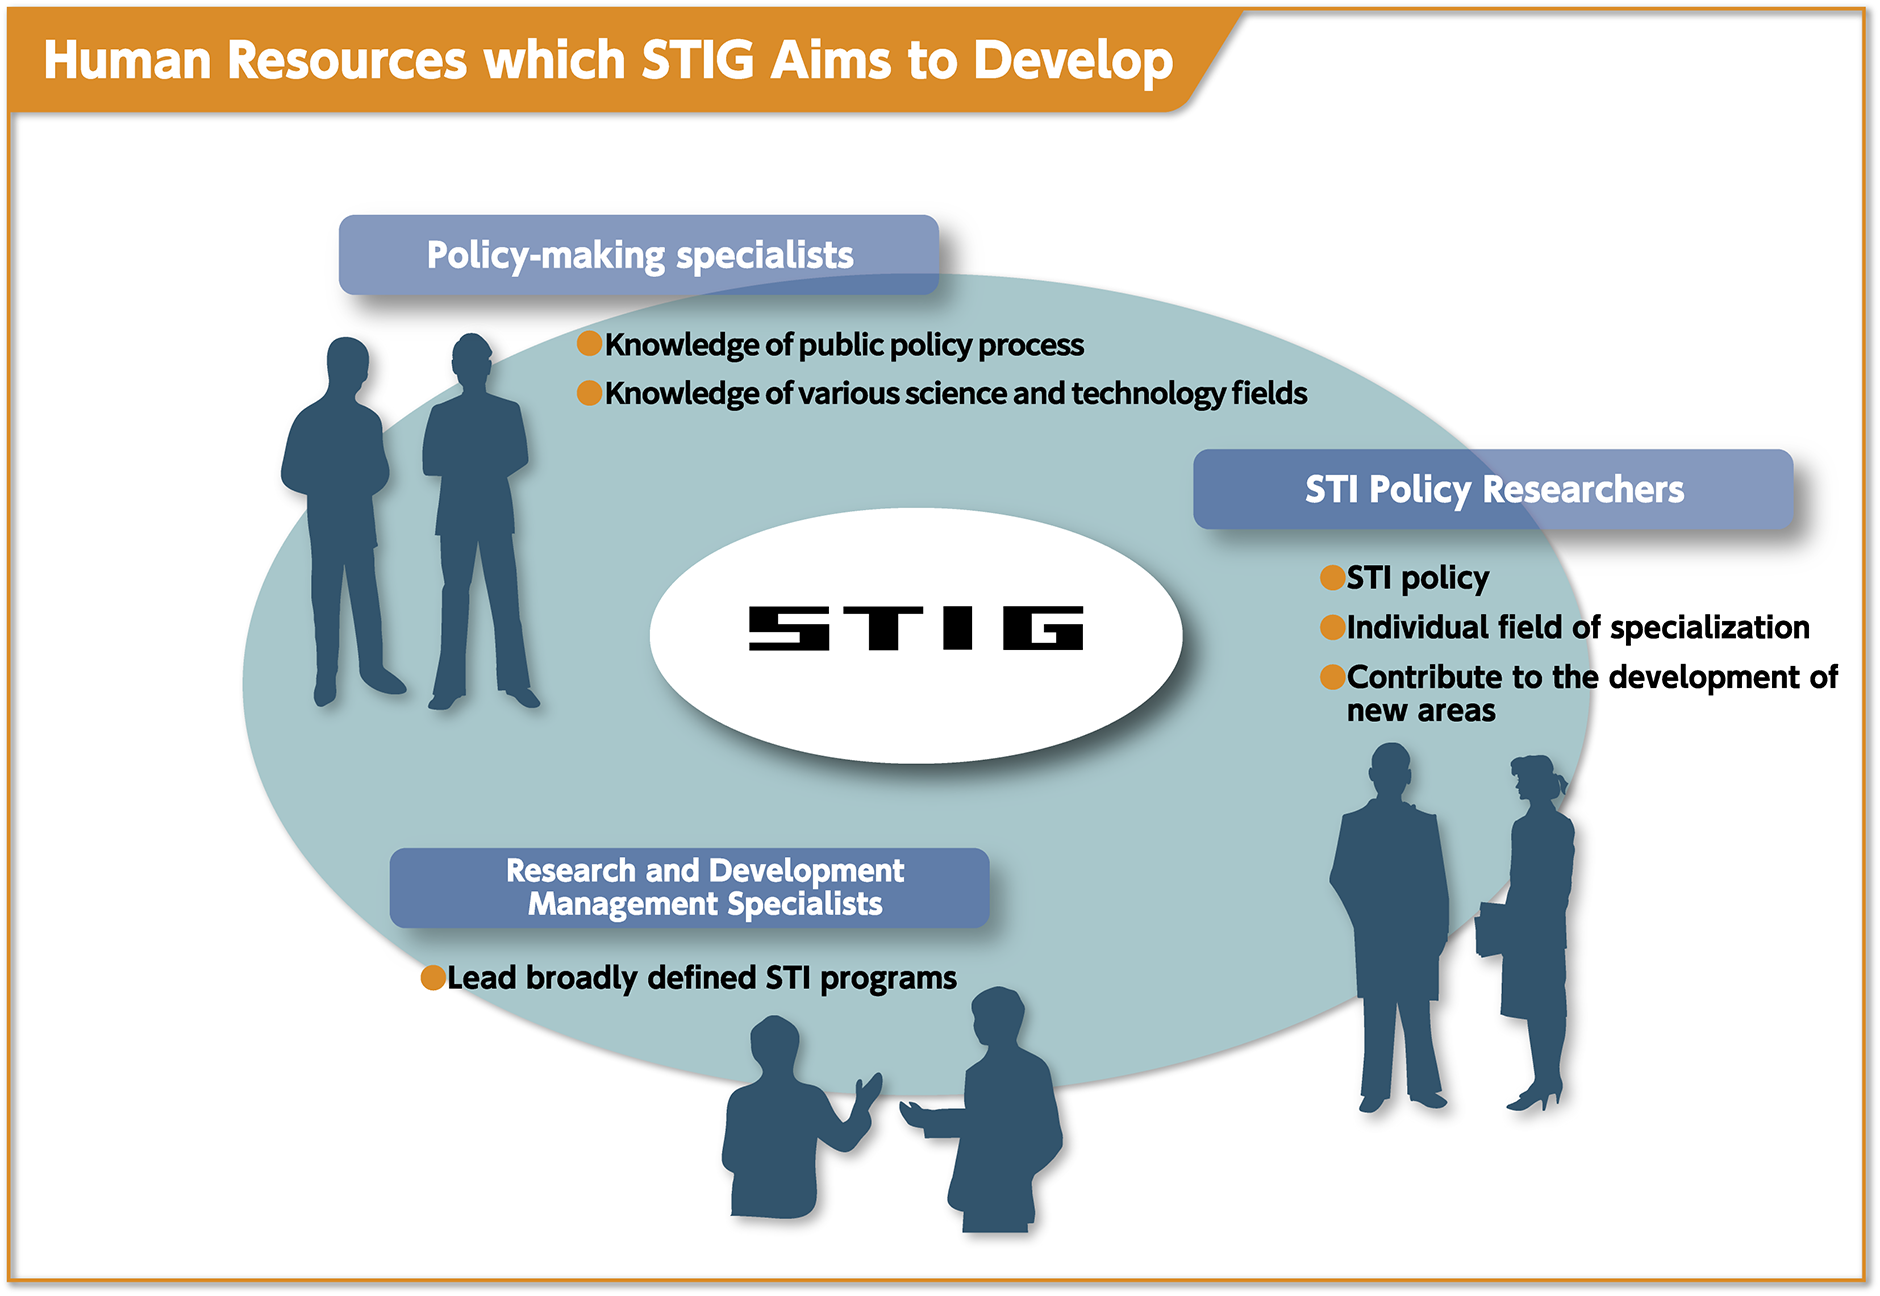 Human Resources which STIG Aims to Develop